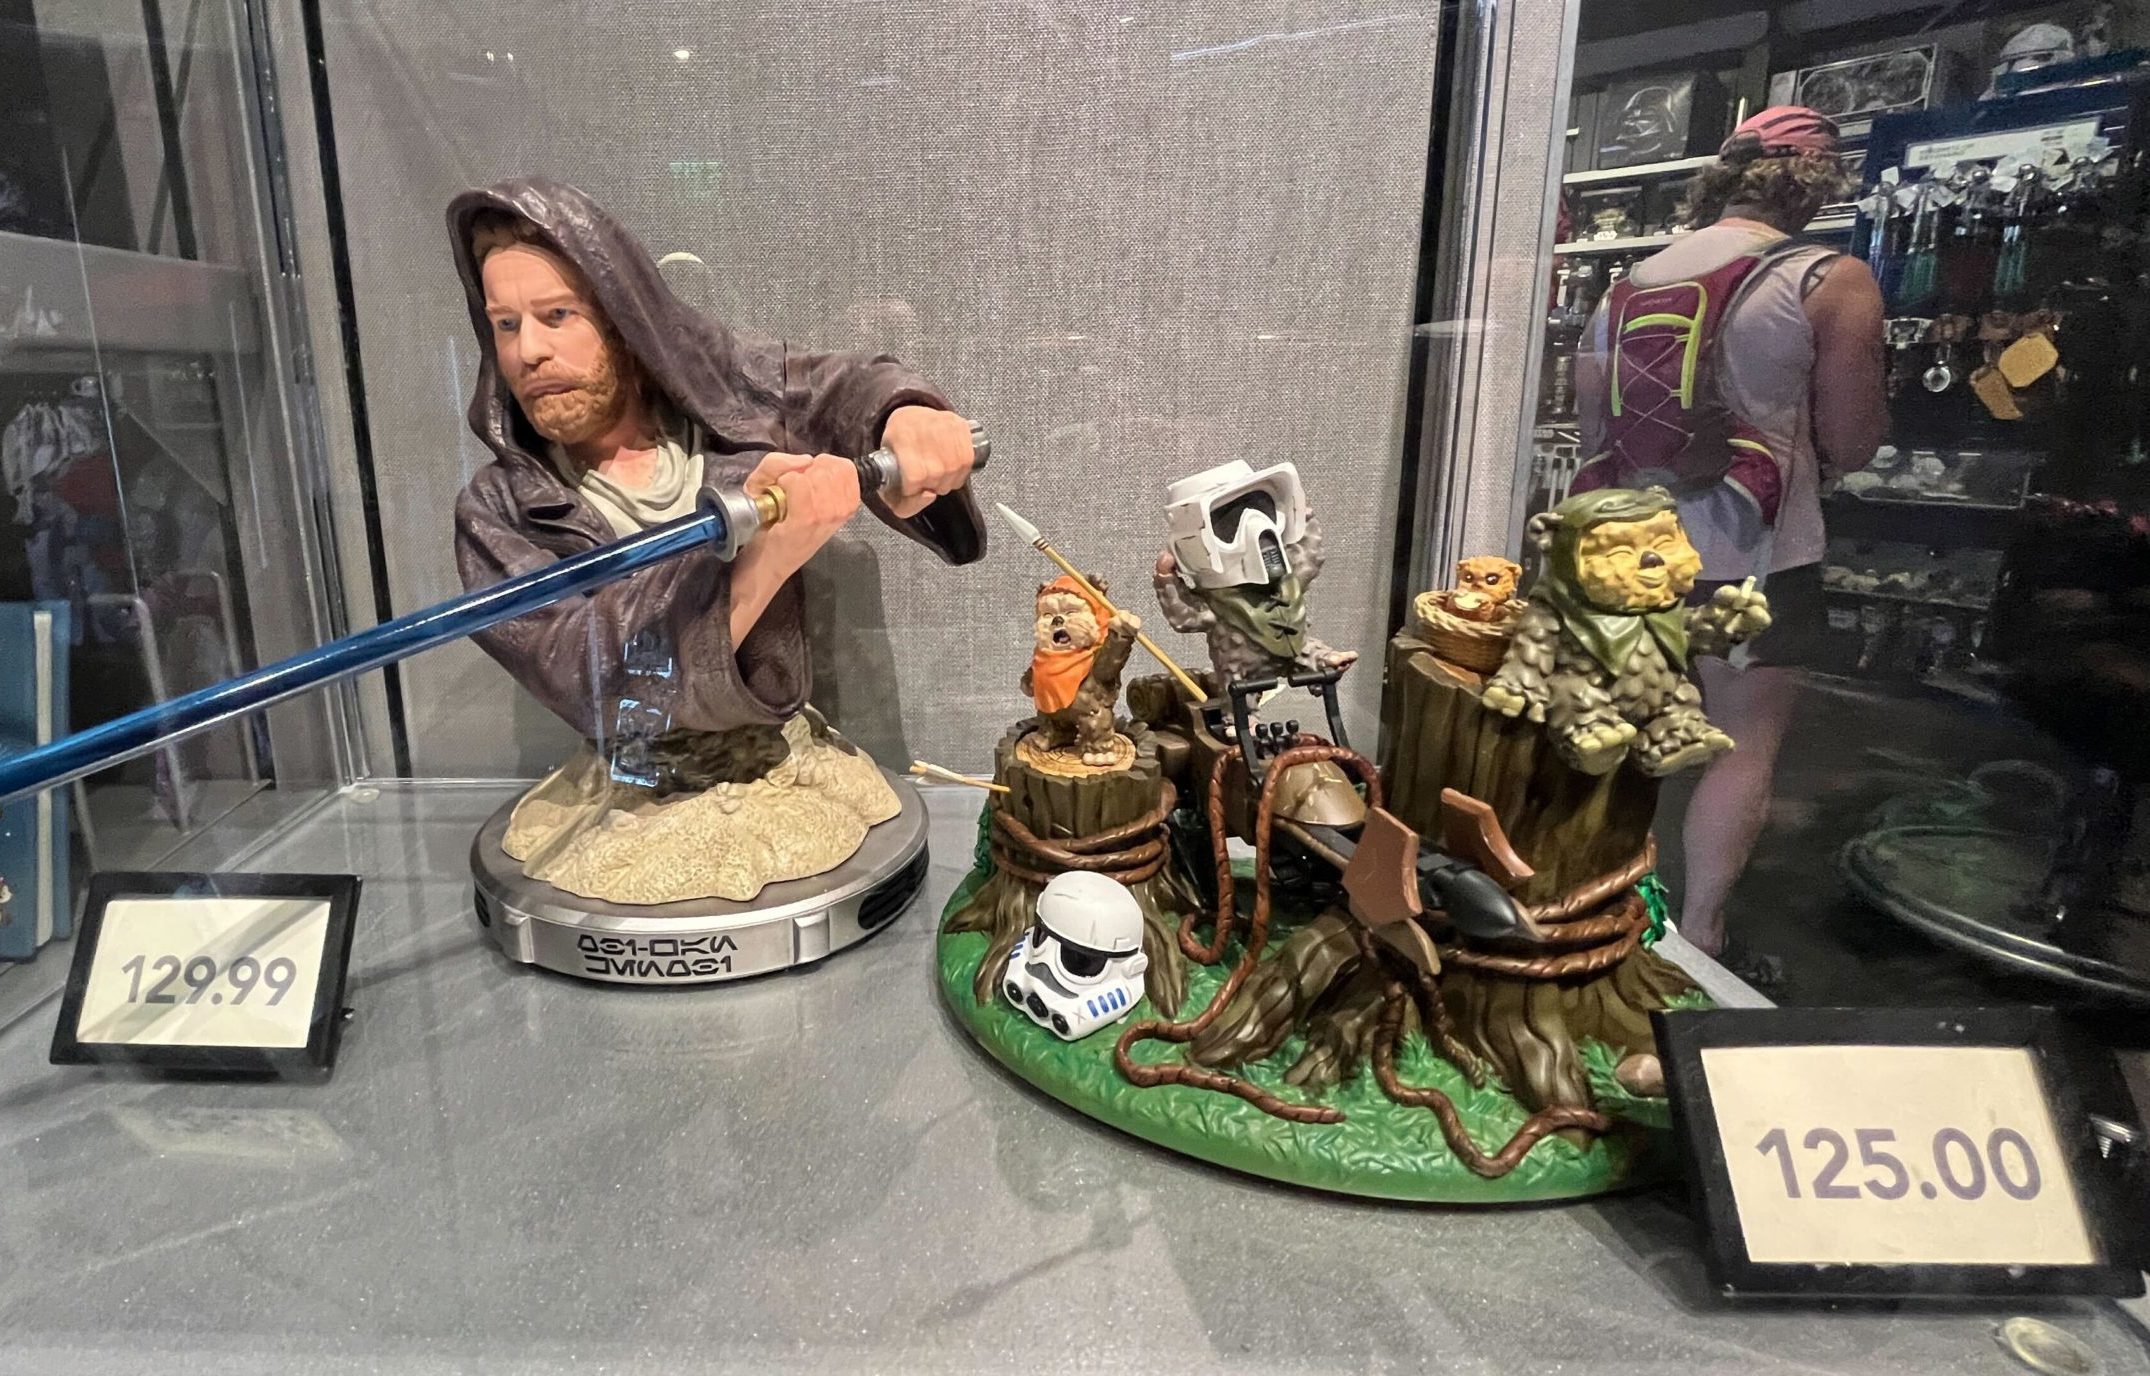 Travel Across the Galaxy with Gentle Giant's New Star Wars Statues